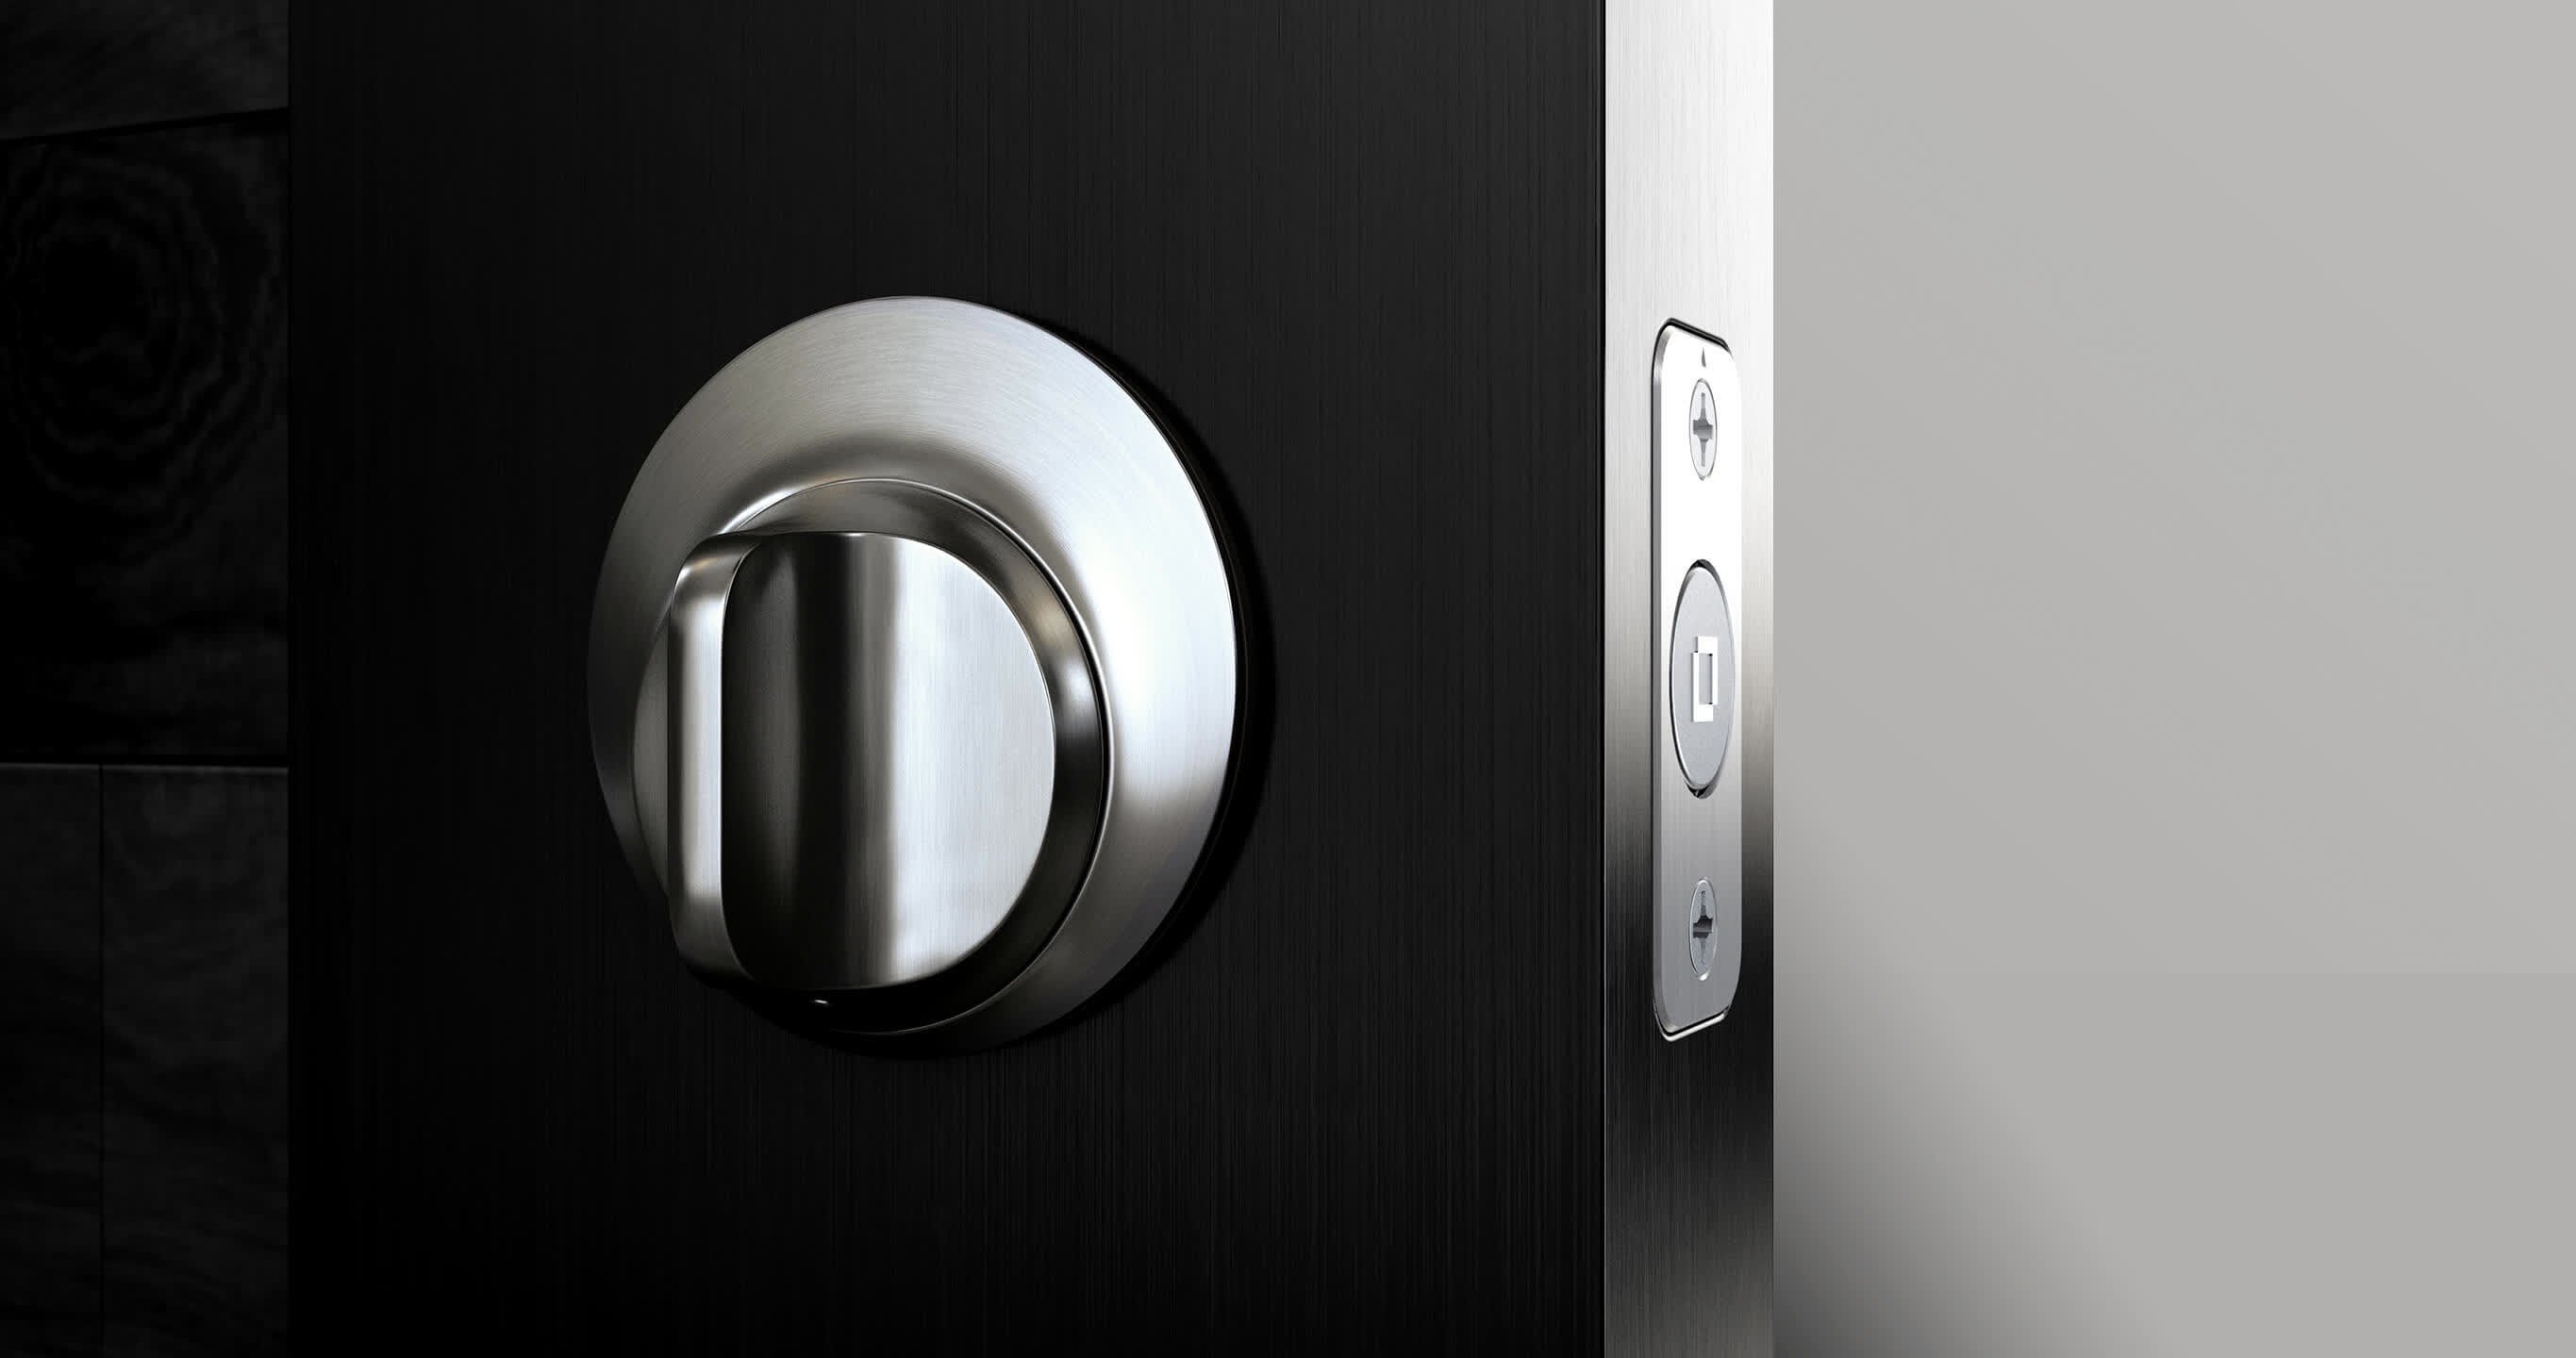 The Level Touch is a smart lock in a timeless design